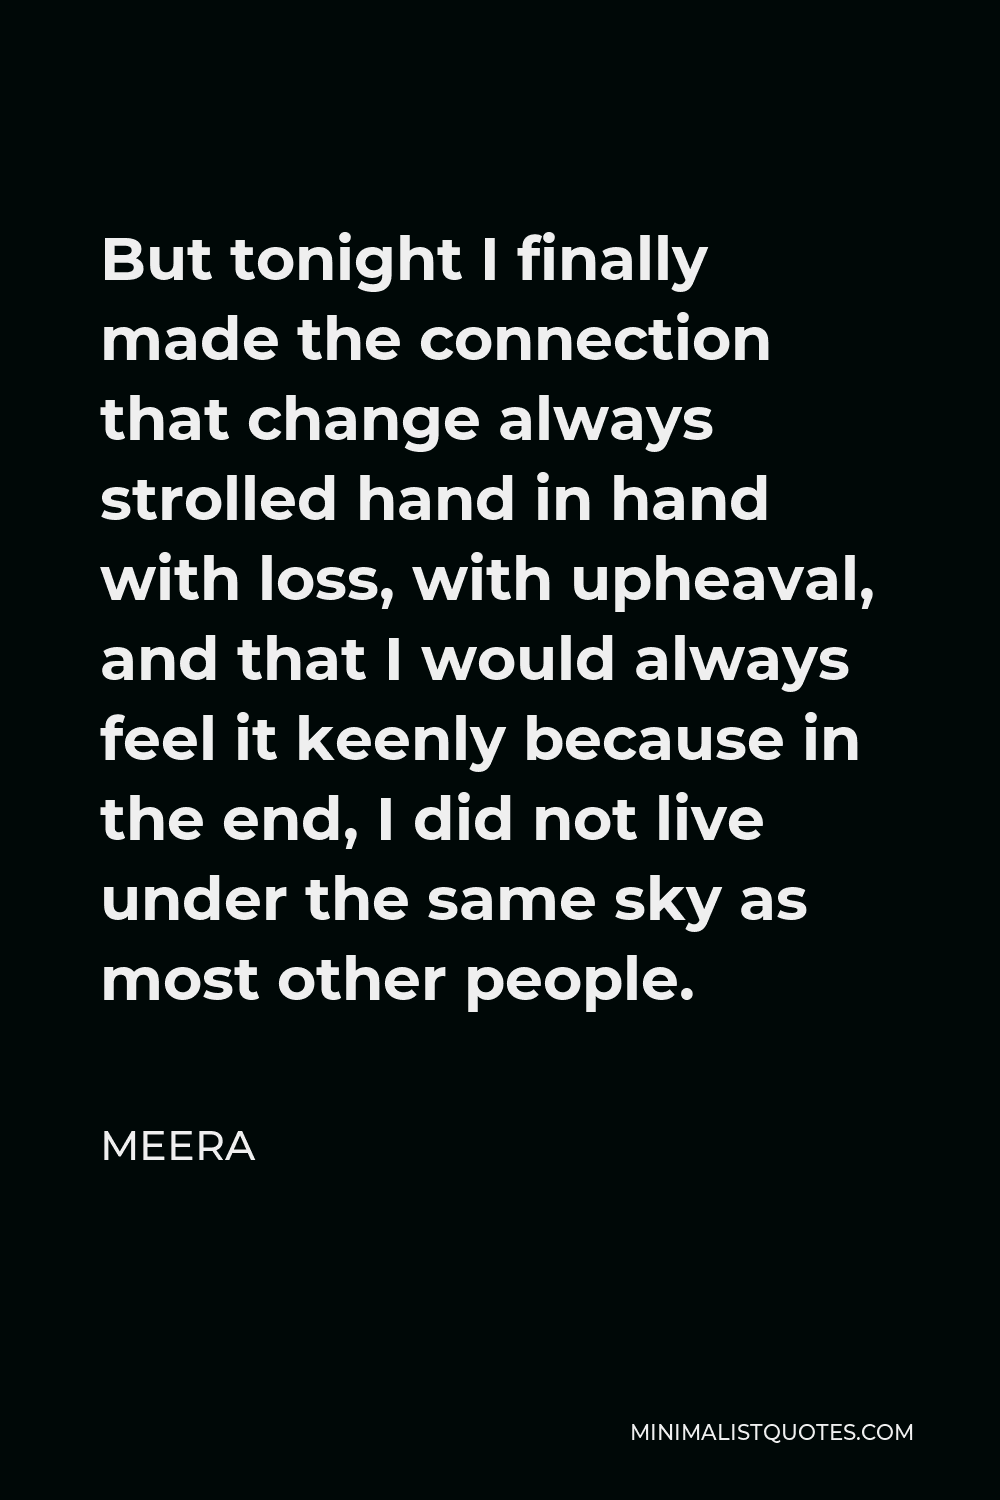 Meera Quote - But tonight I finally made the connection that change always strolled hand in hand with loss, with upheaval, and that I would always feel it keenly because in the end, I did not live under the same sky as most other people.